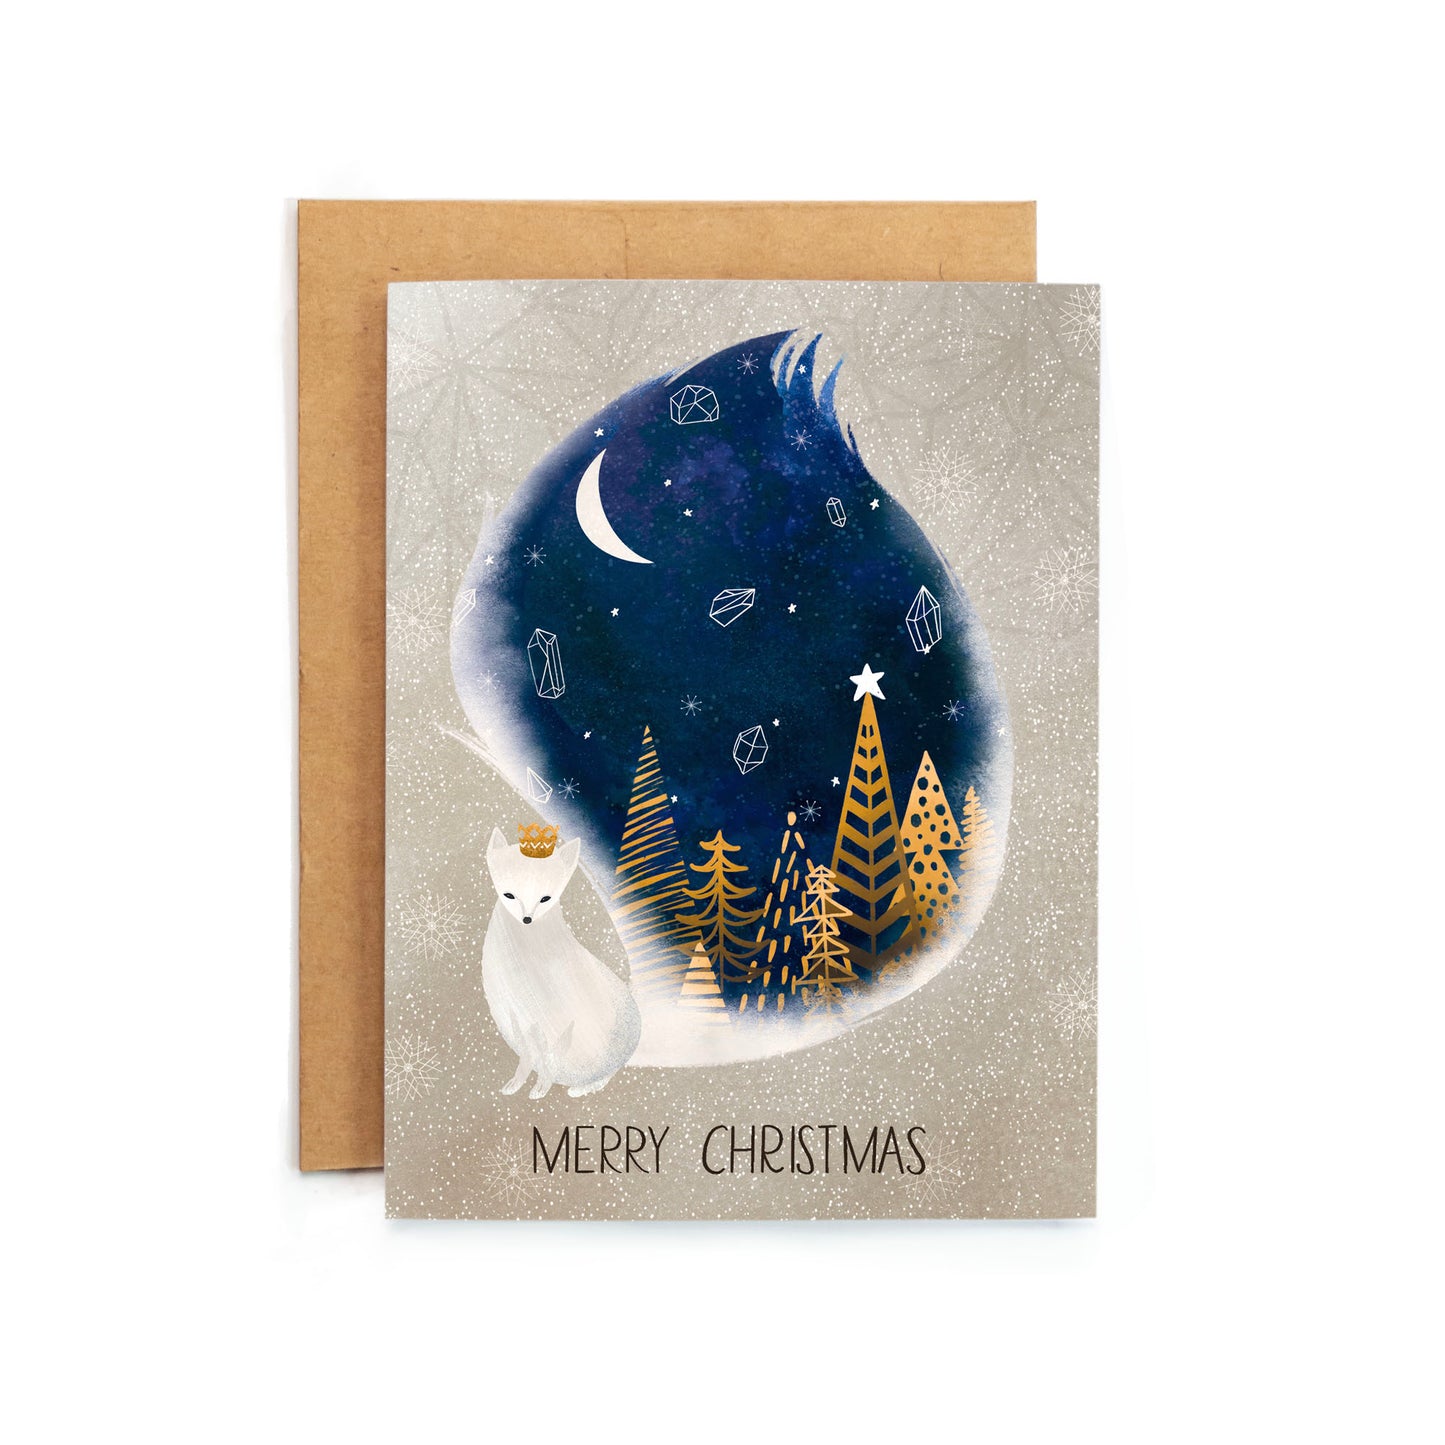 a christmas card with a white cat and trees